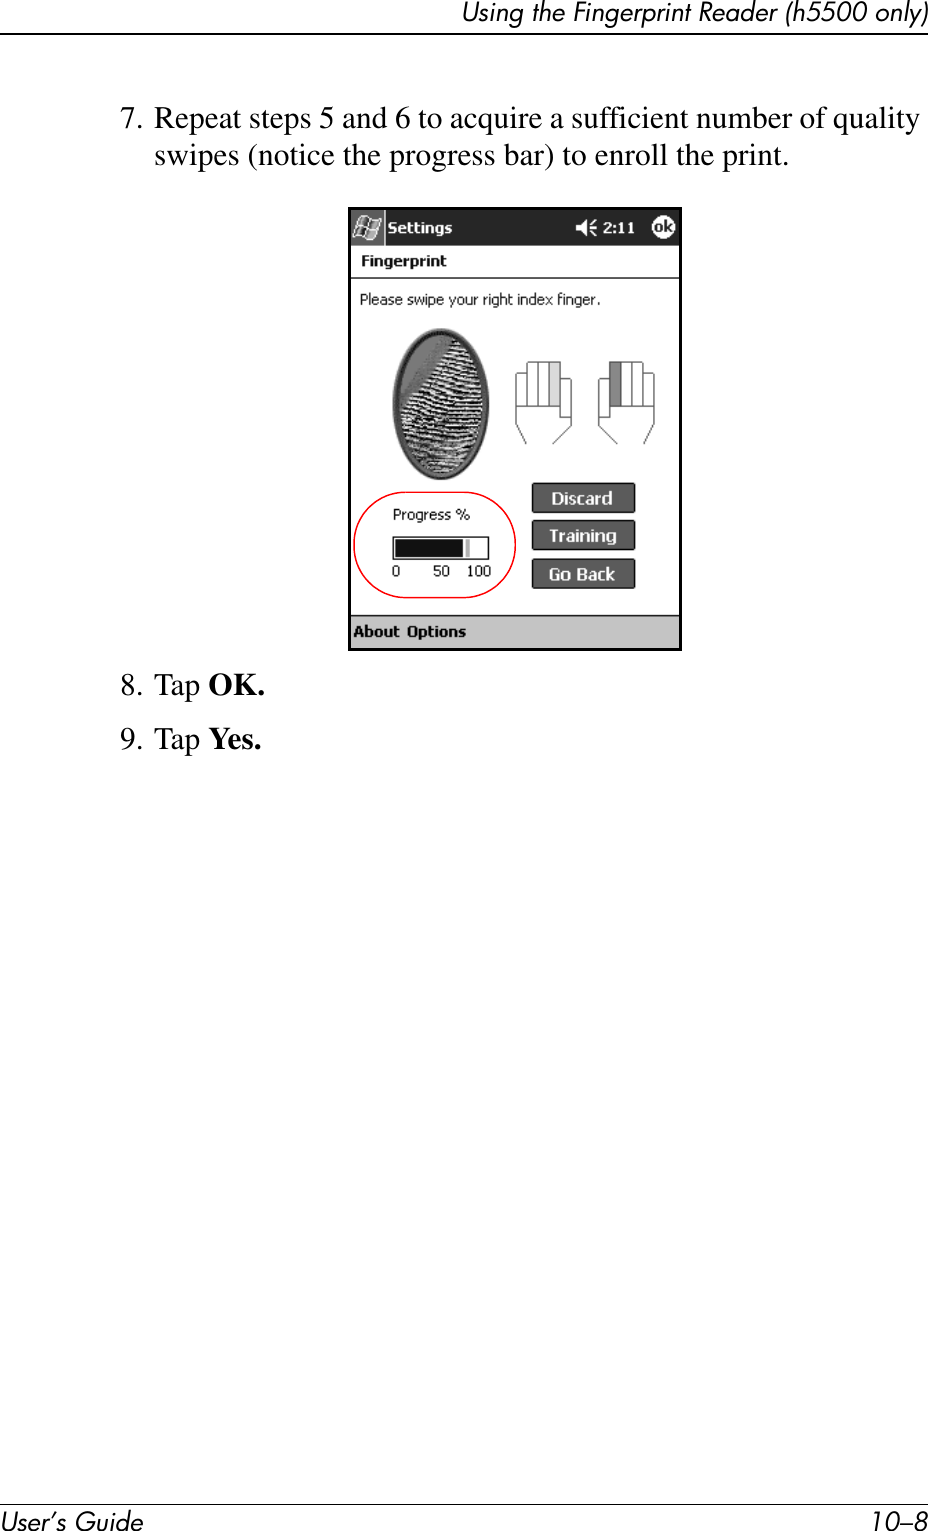 User’s Guide 10–8Using the Fingerprint Reader (h5500 only)7. Repeat steps 5 and 6 to acquire a sufficient number of quality swipes (notice the progress bar) to enroll the print.8. Tap OK.9. Tap Ye s .